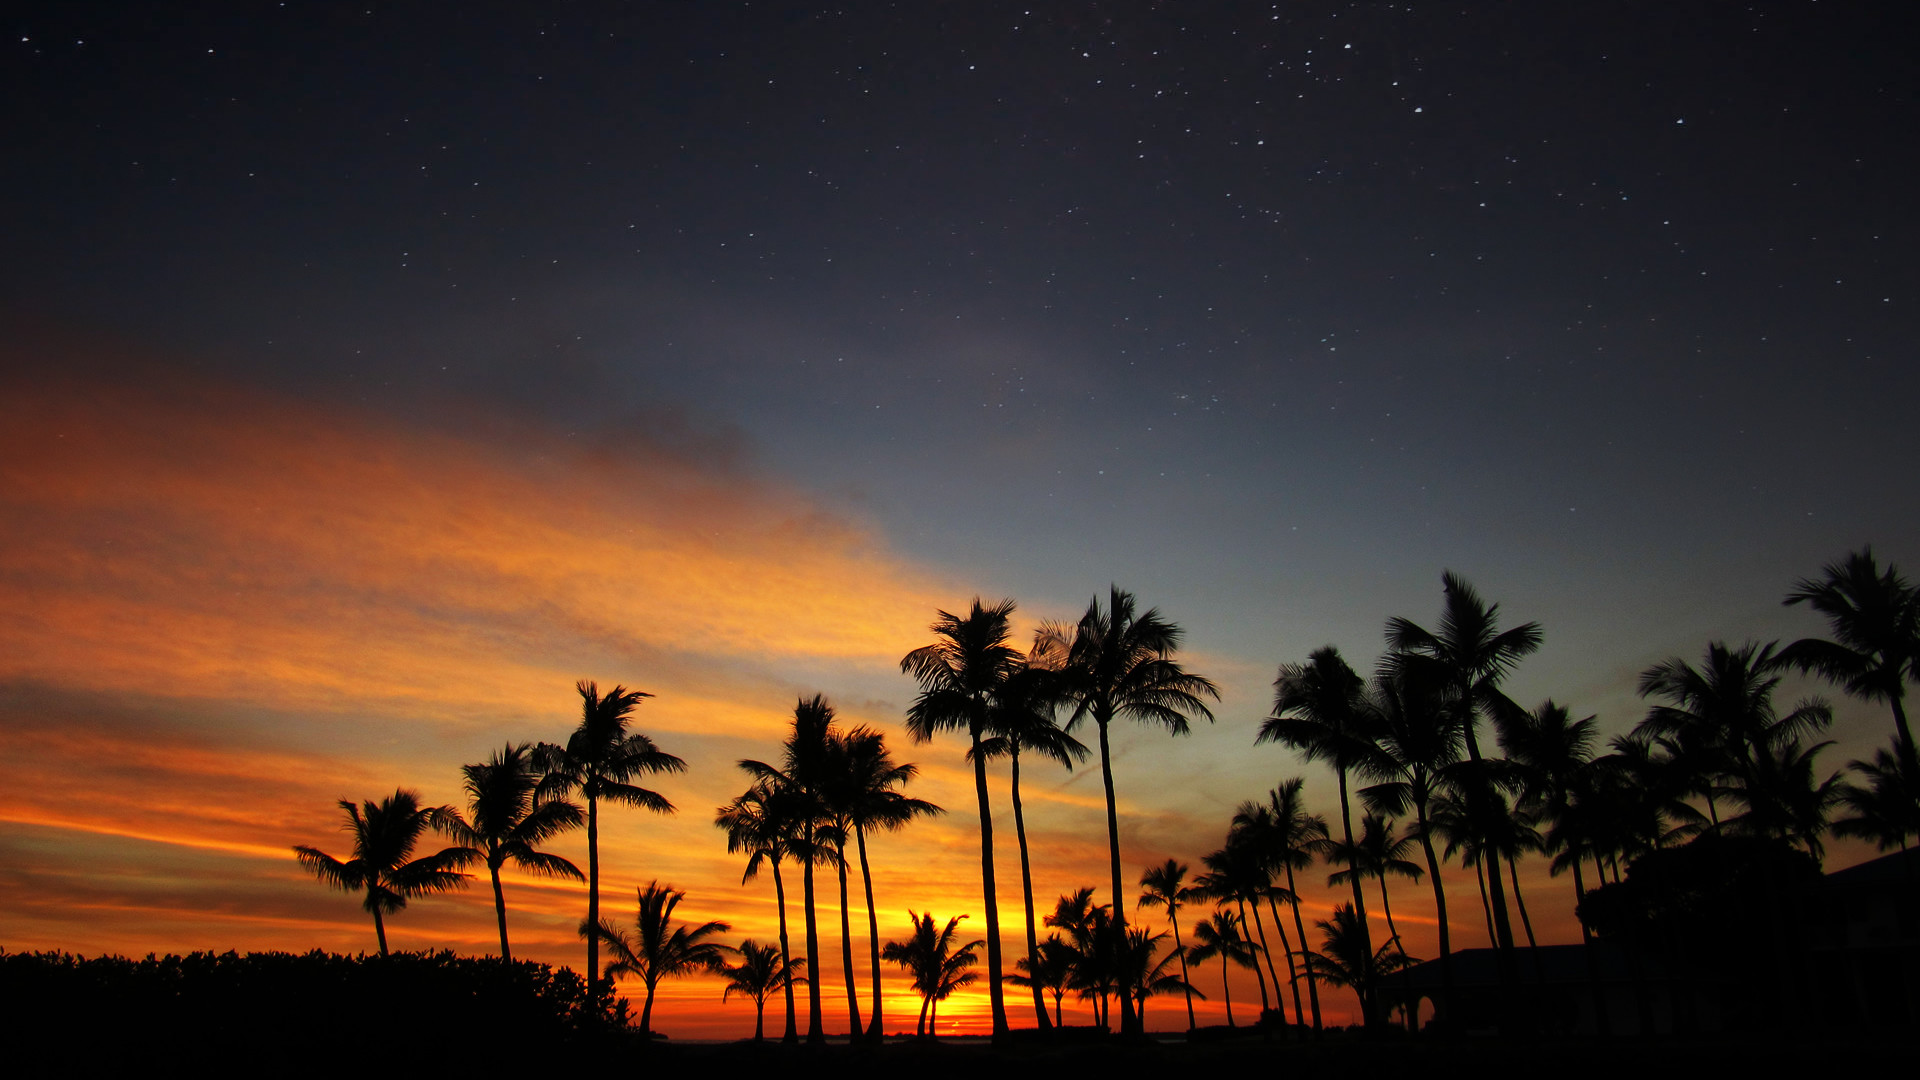 1920x1080 After Sunset in the Florida Keys - Christmas 2014 [] [OC] ...